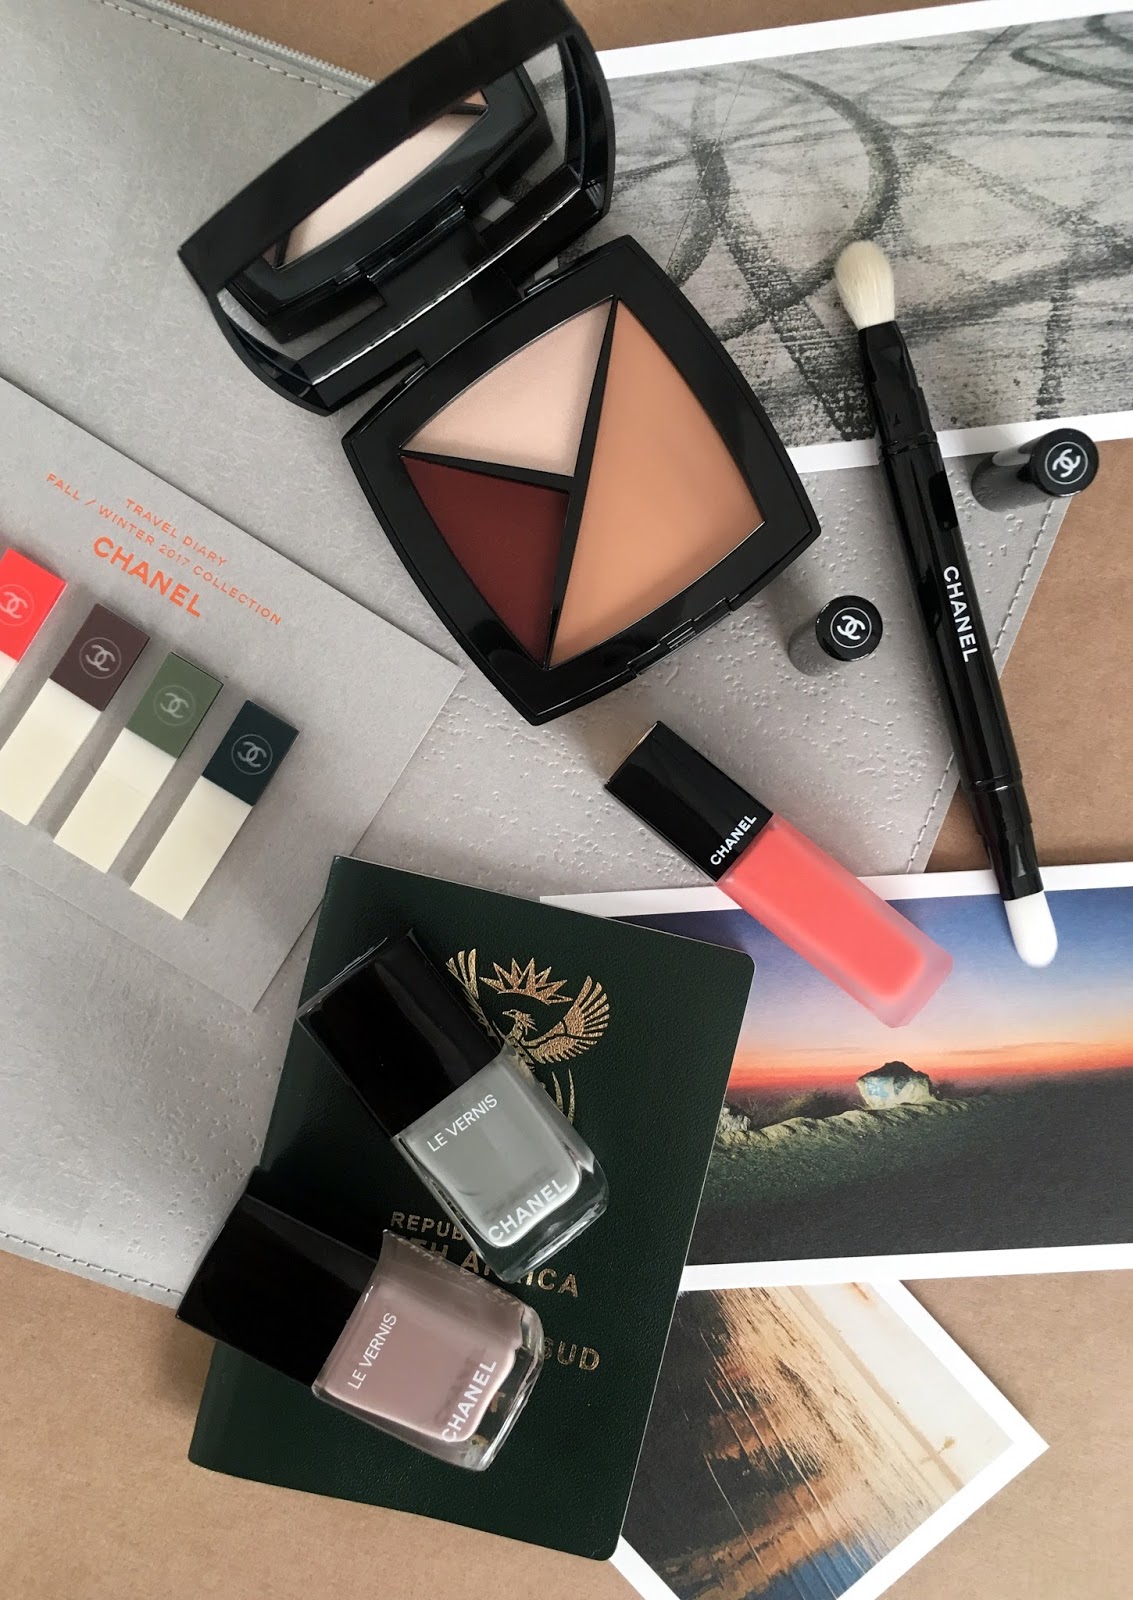 HONEY AND SILK: CHANEL Fall/Winter 2017 'Travel Diary' Makeup Collection